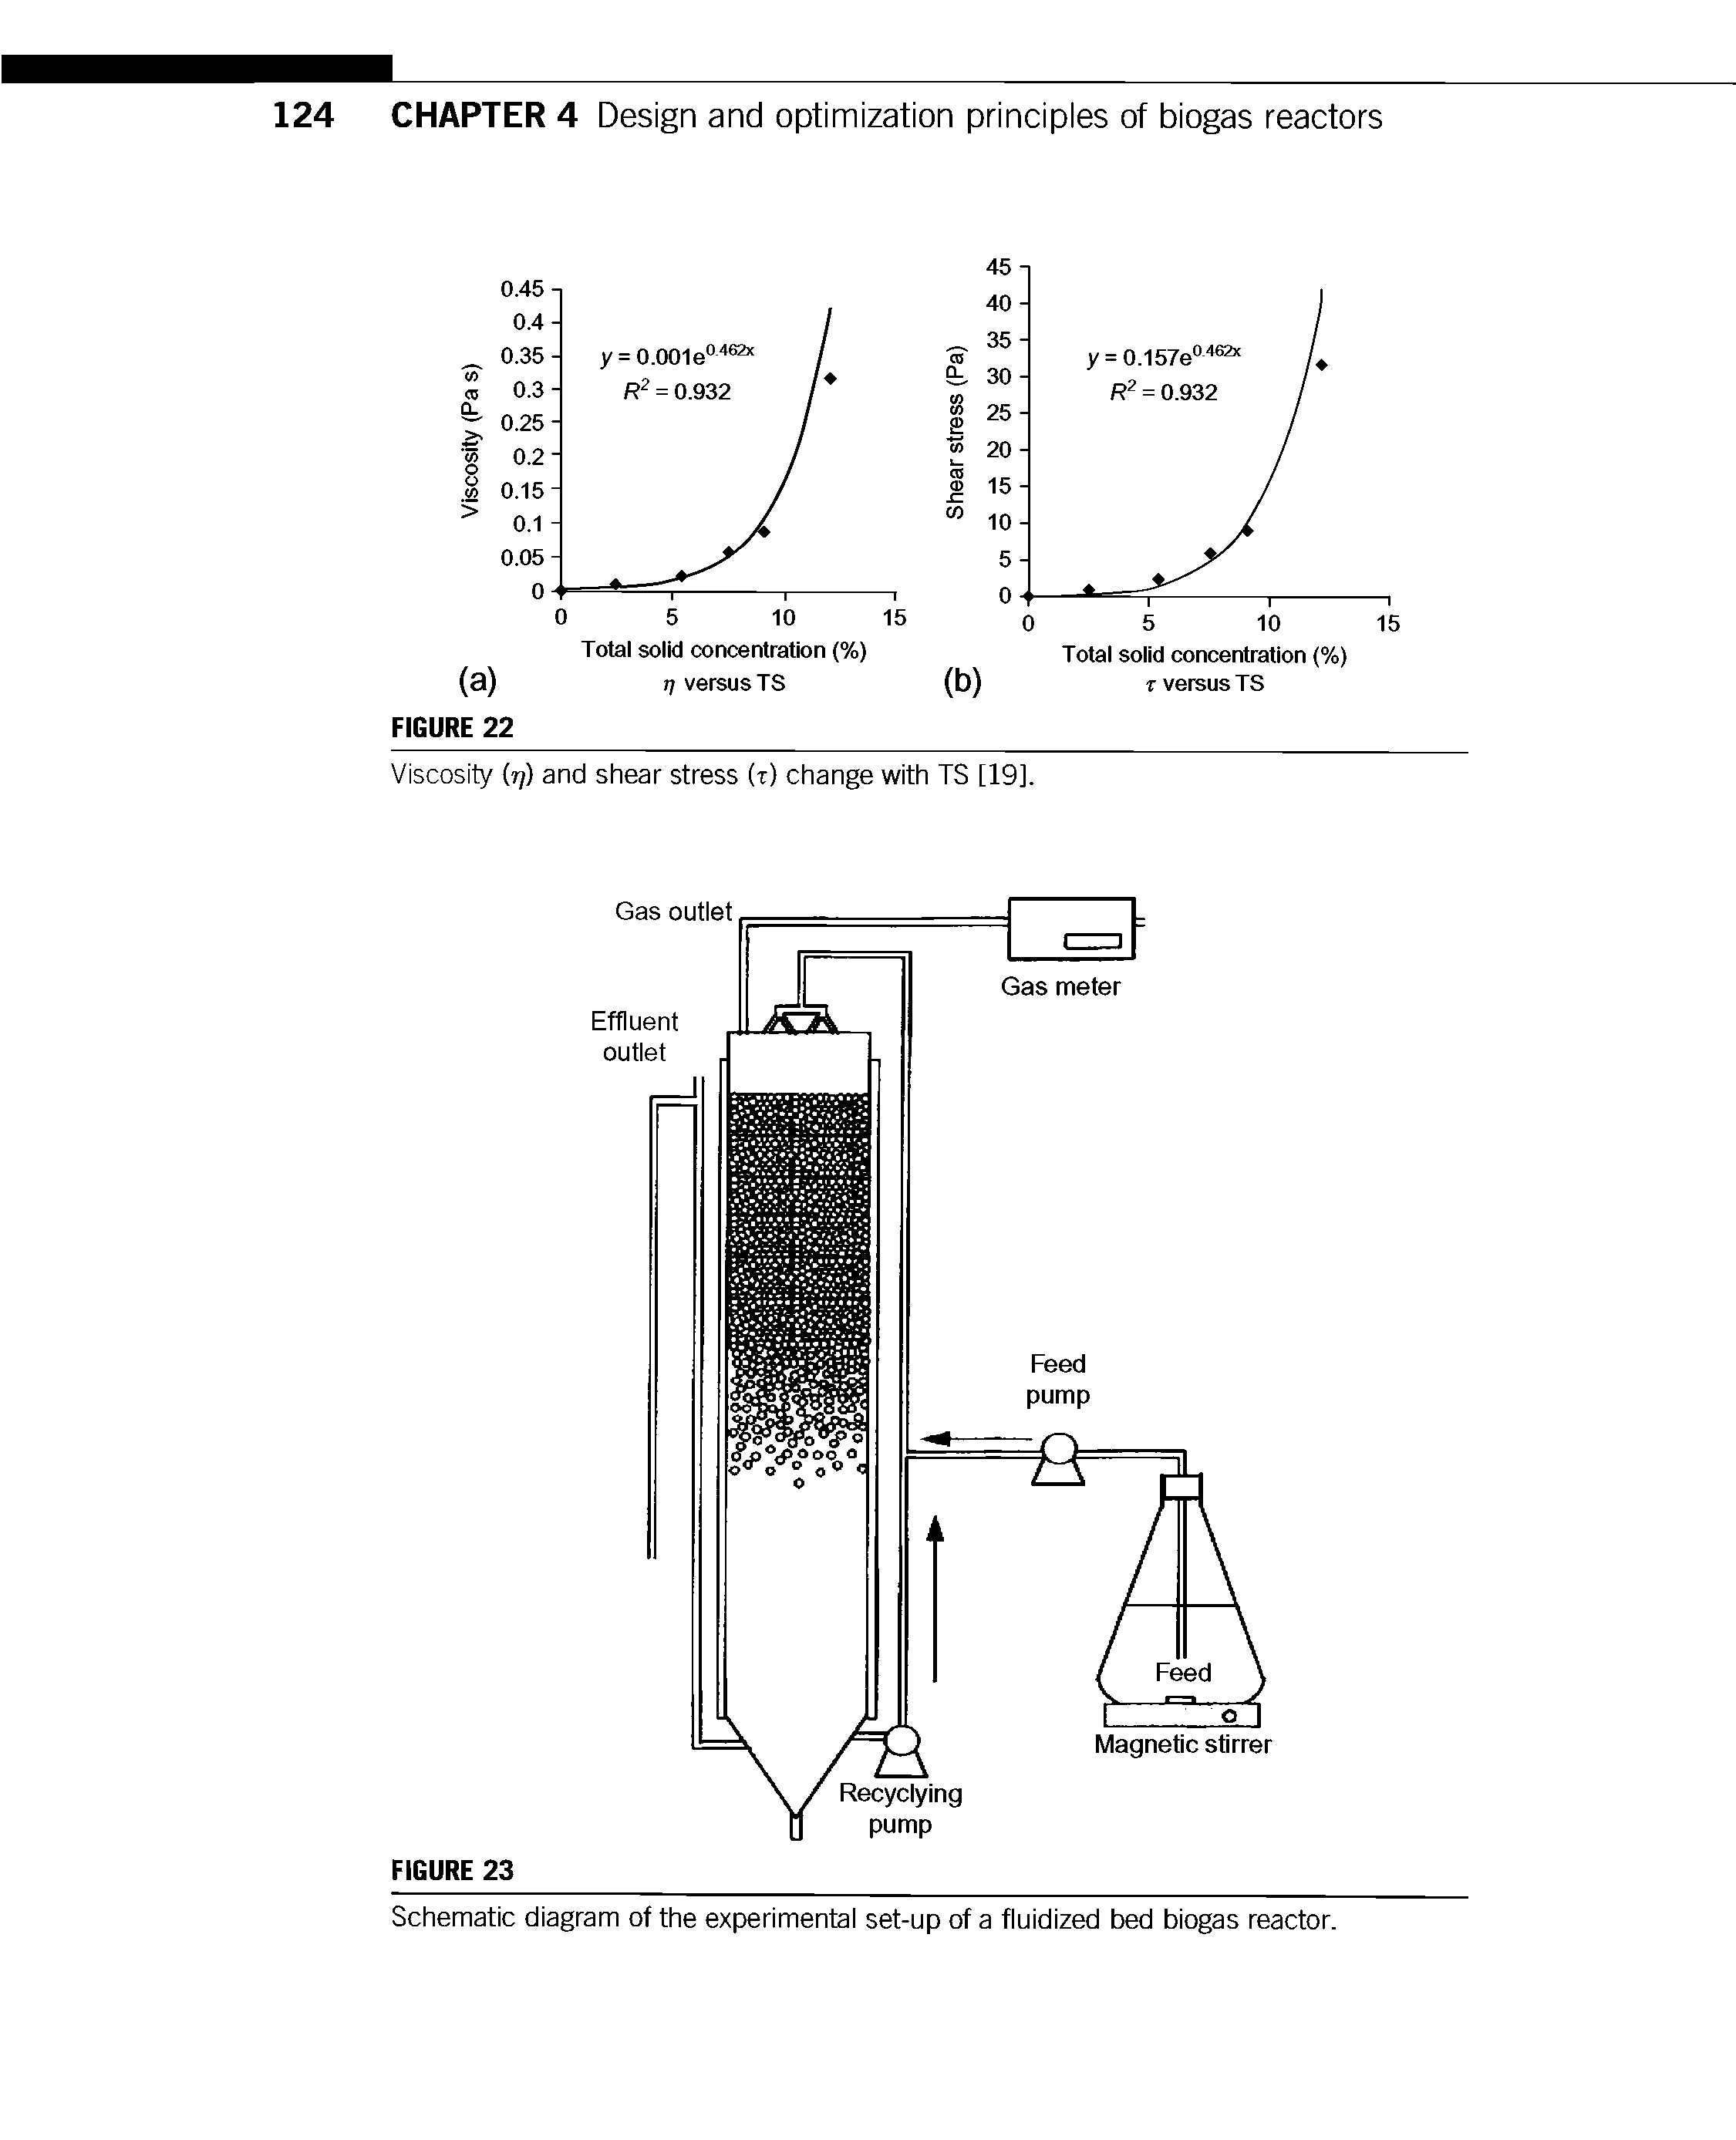 Schematic diagram of the experimental set-up of a fluidized bed biogas reactor.